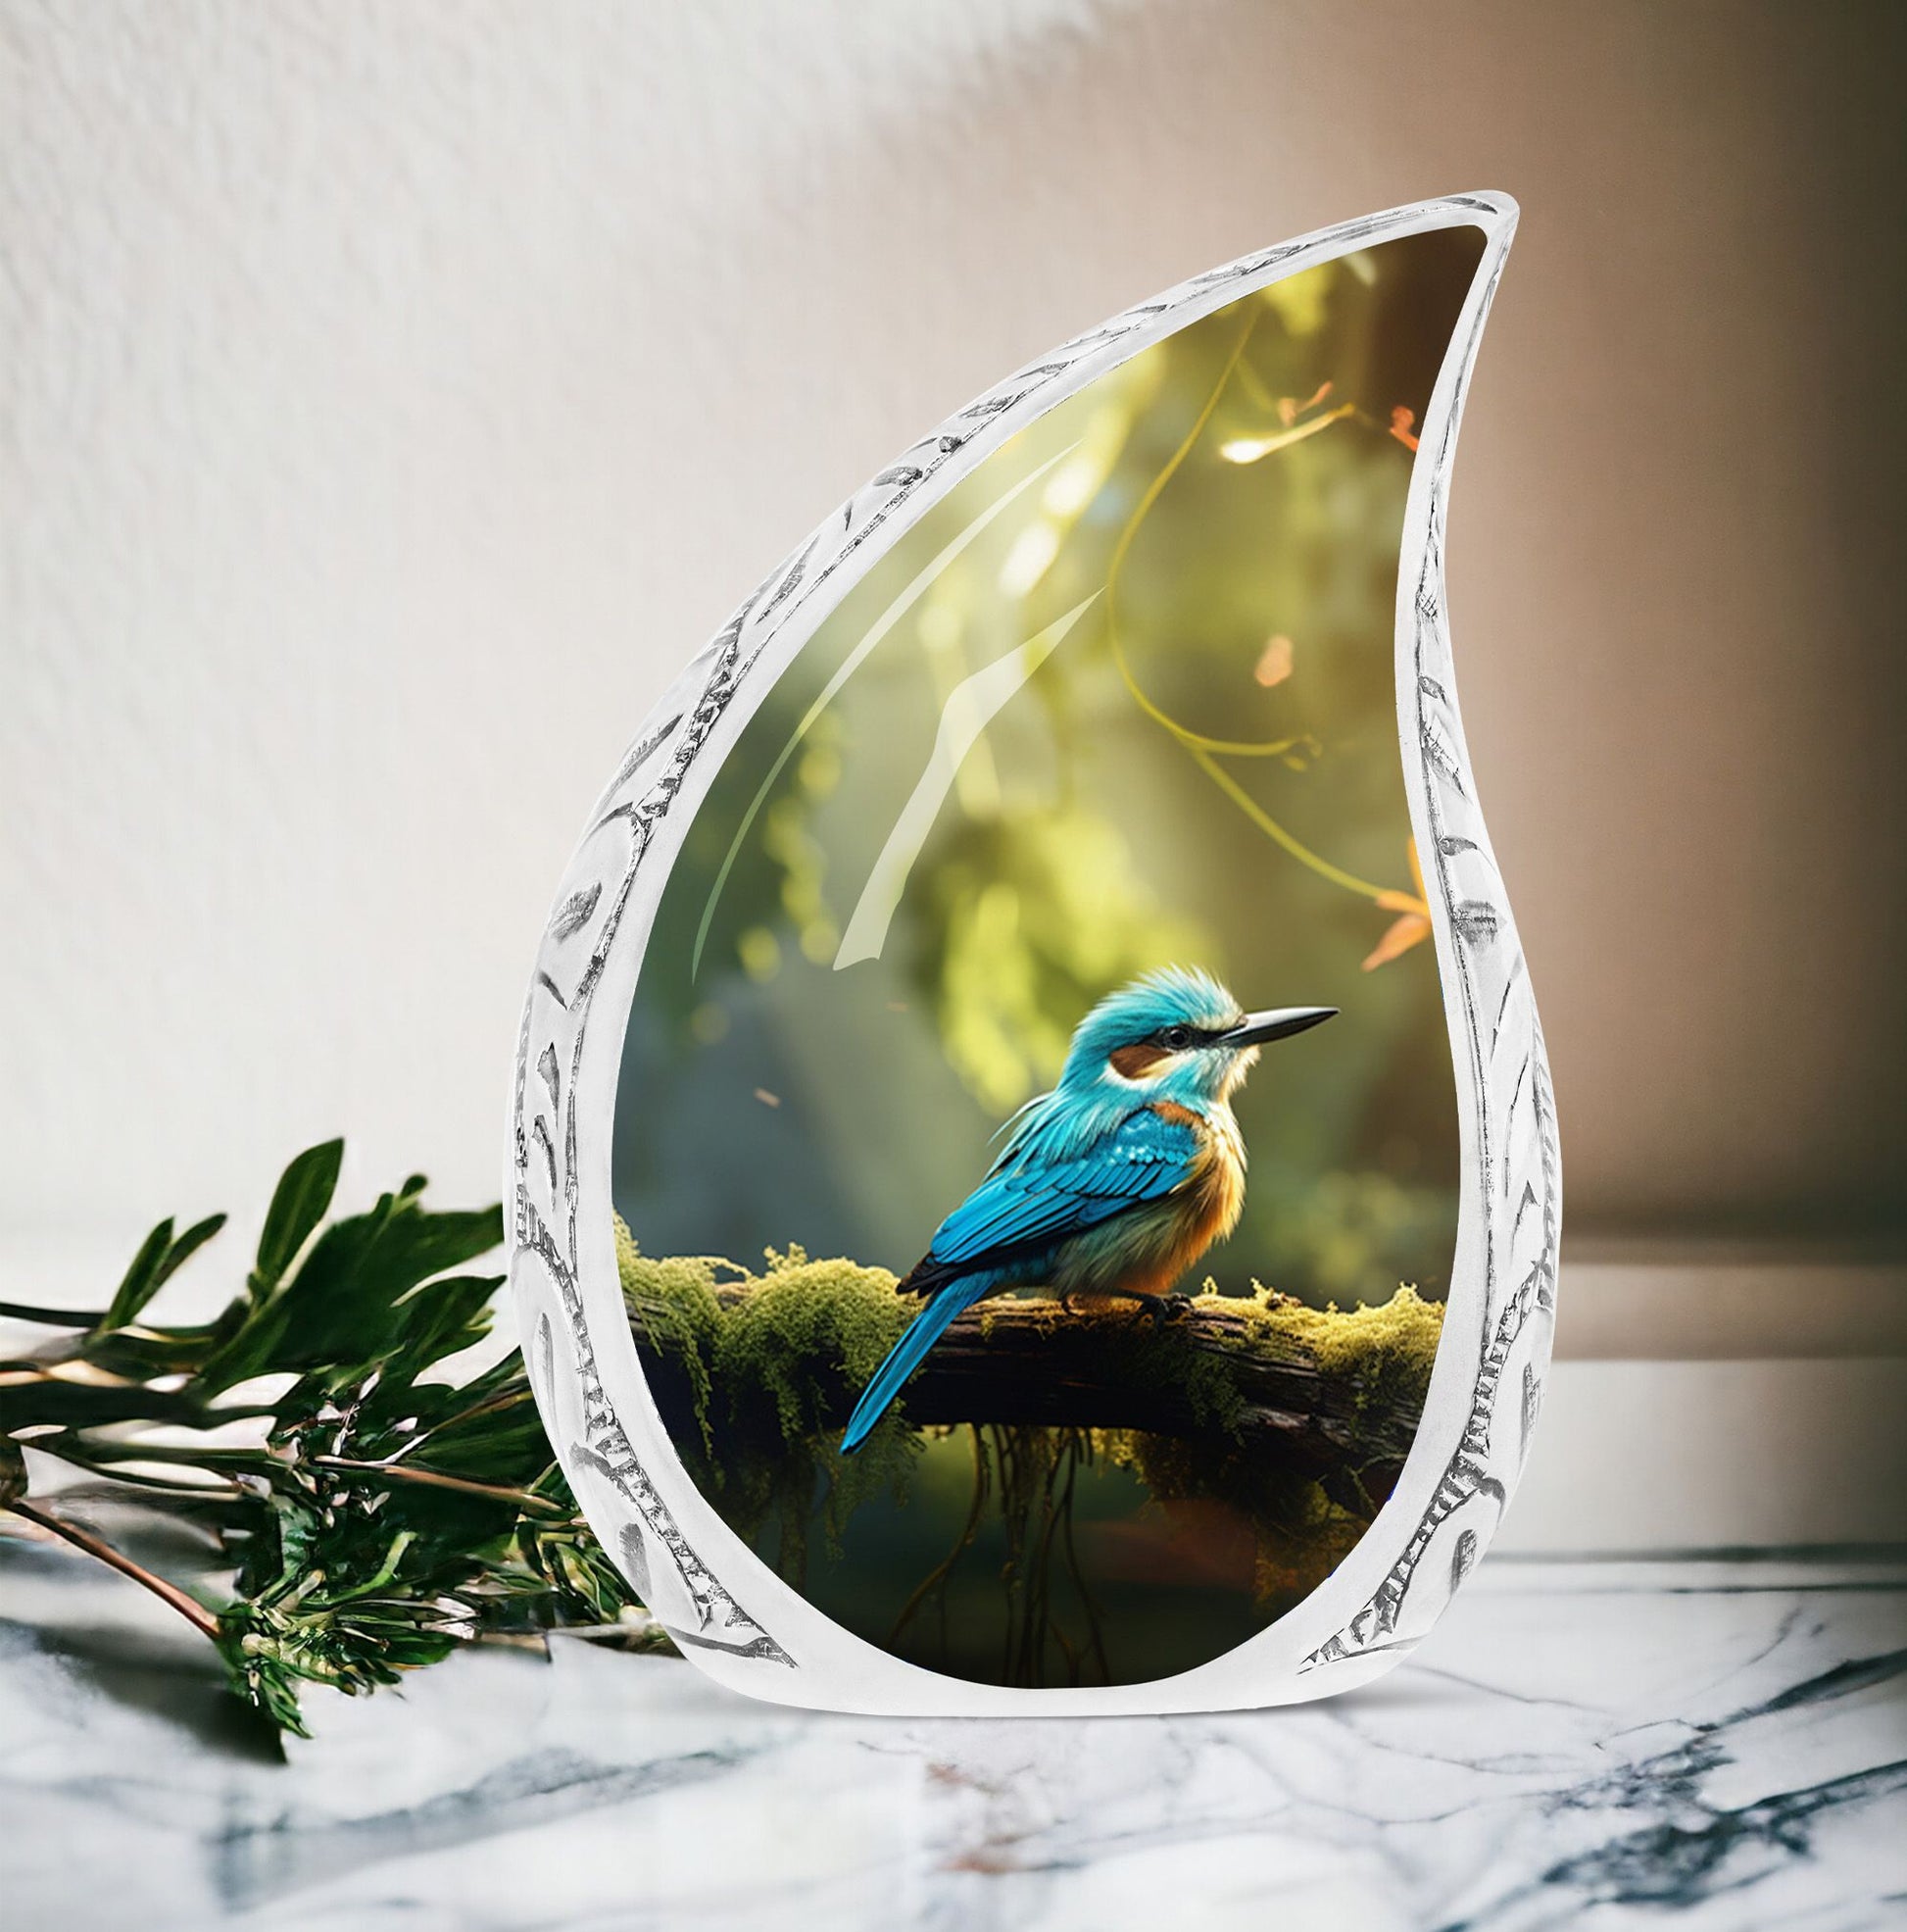 Large blue sparrow urn amidst green forest, designed for human ashes, suitable for funeral and cremation needs